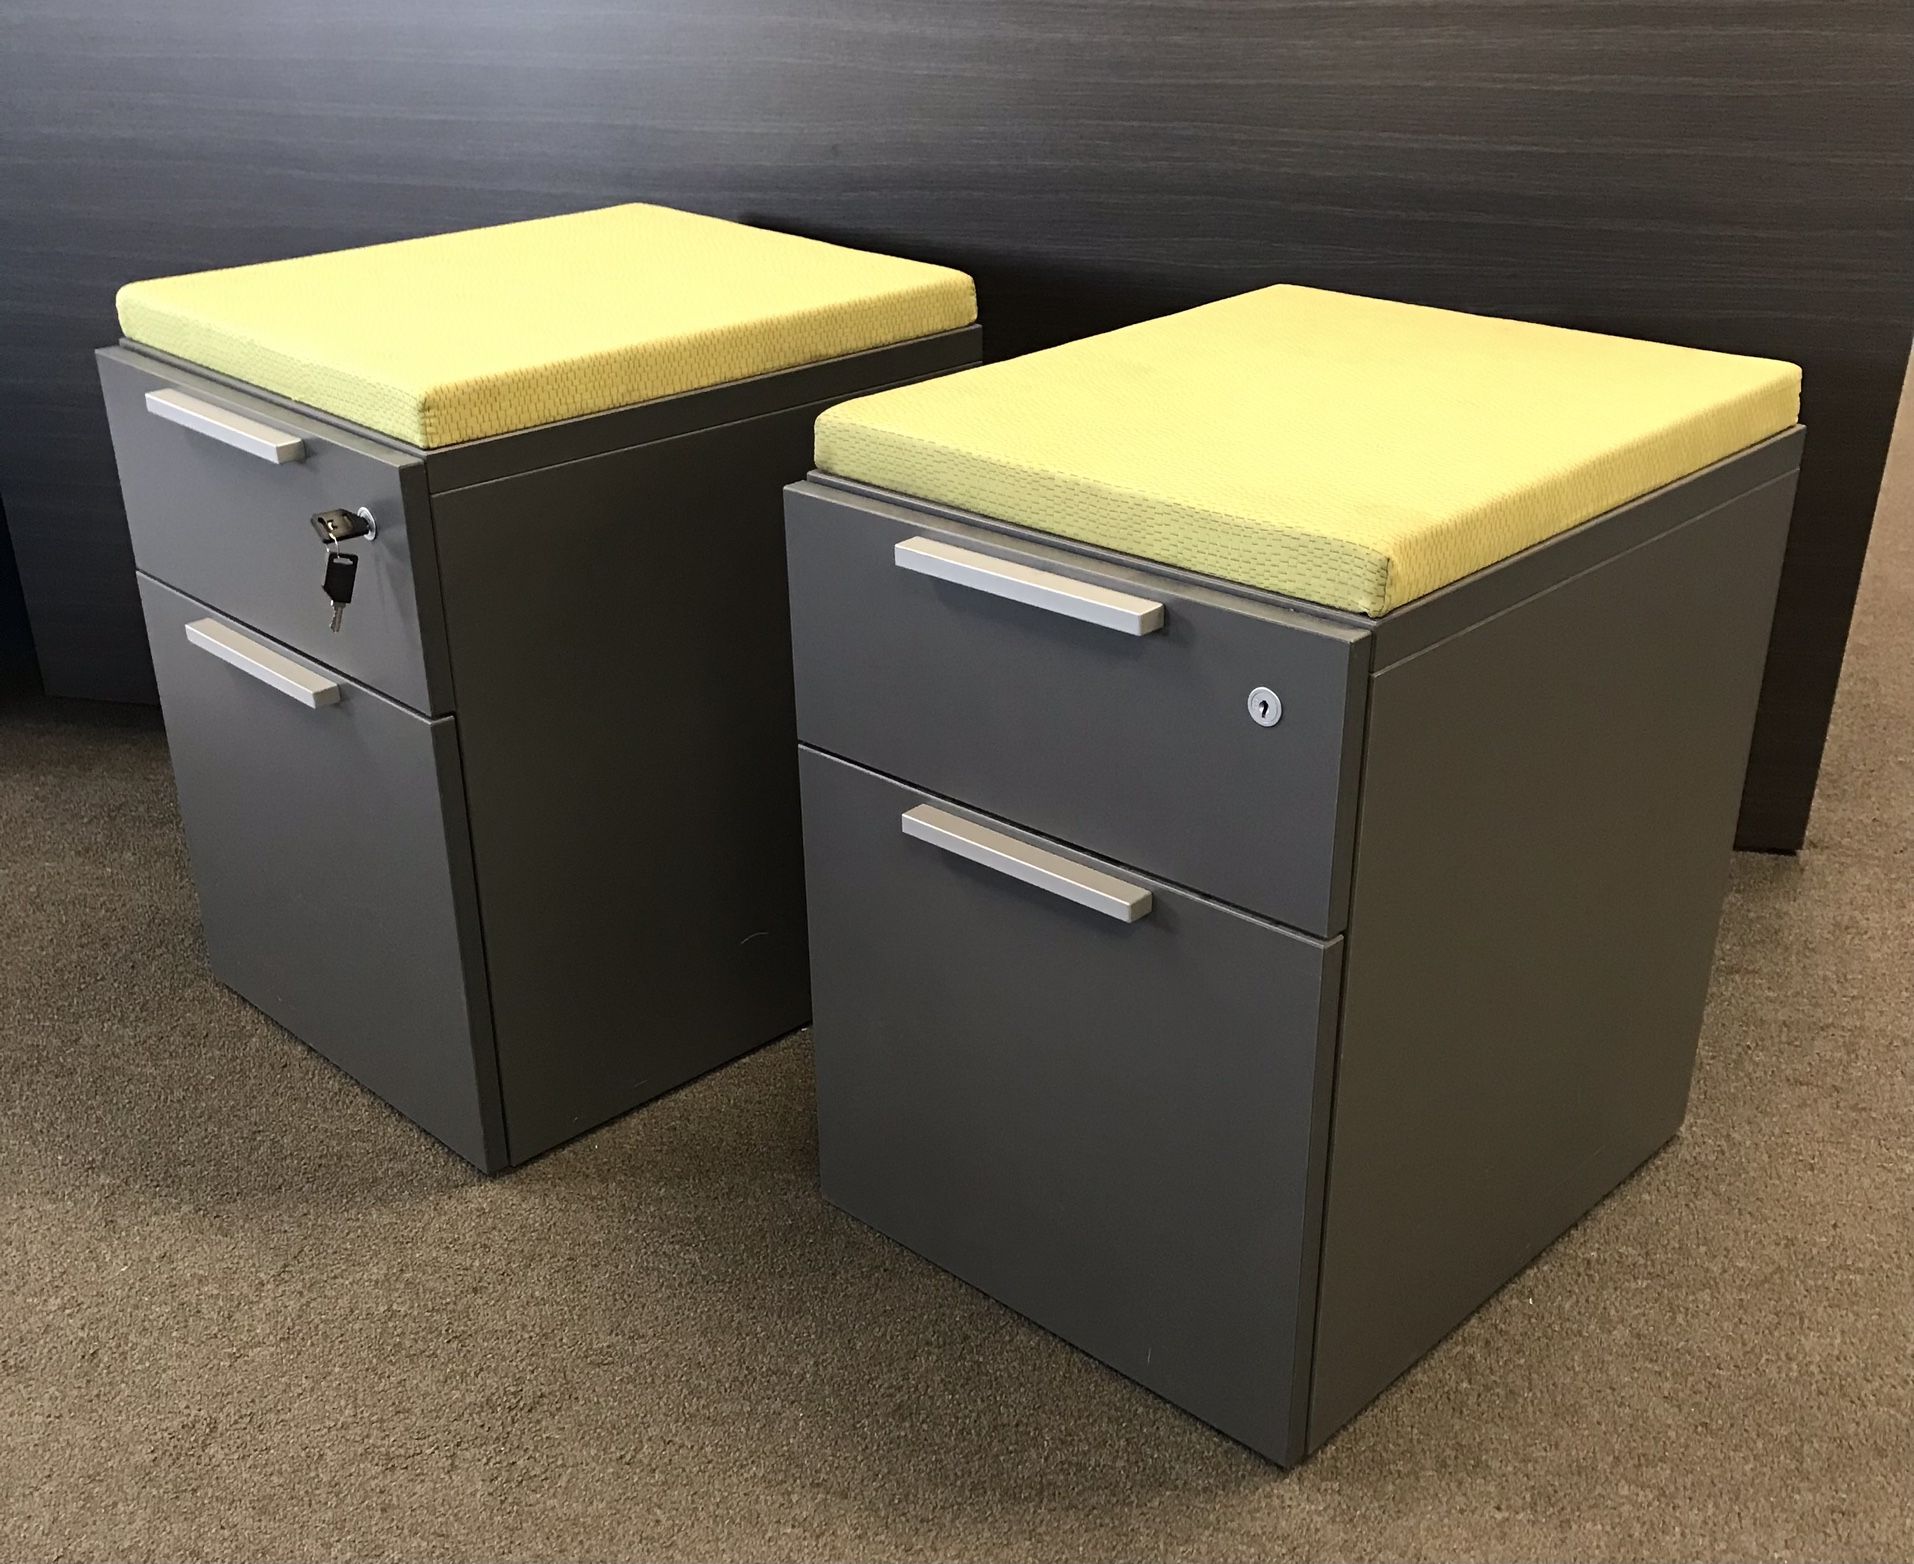 Used Office Furniture For Sale $125 For Each Filing Cabinet- Great Condition (Tampa)